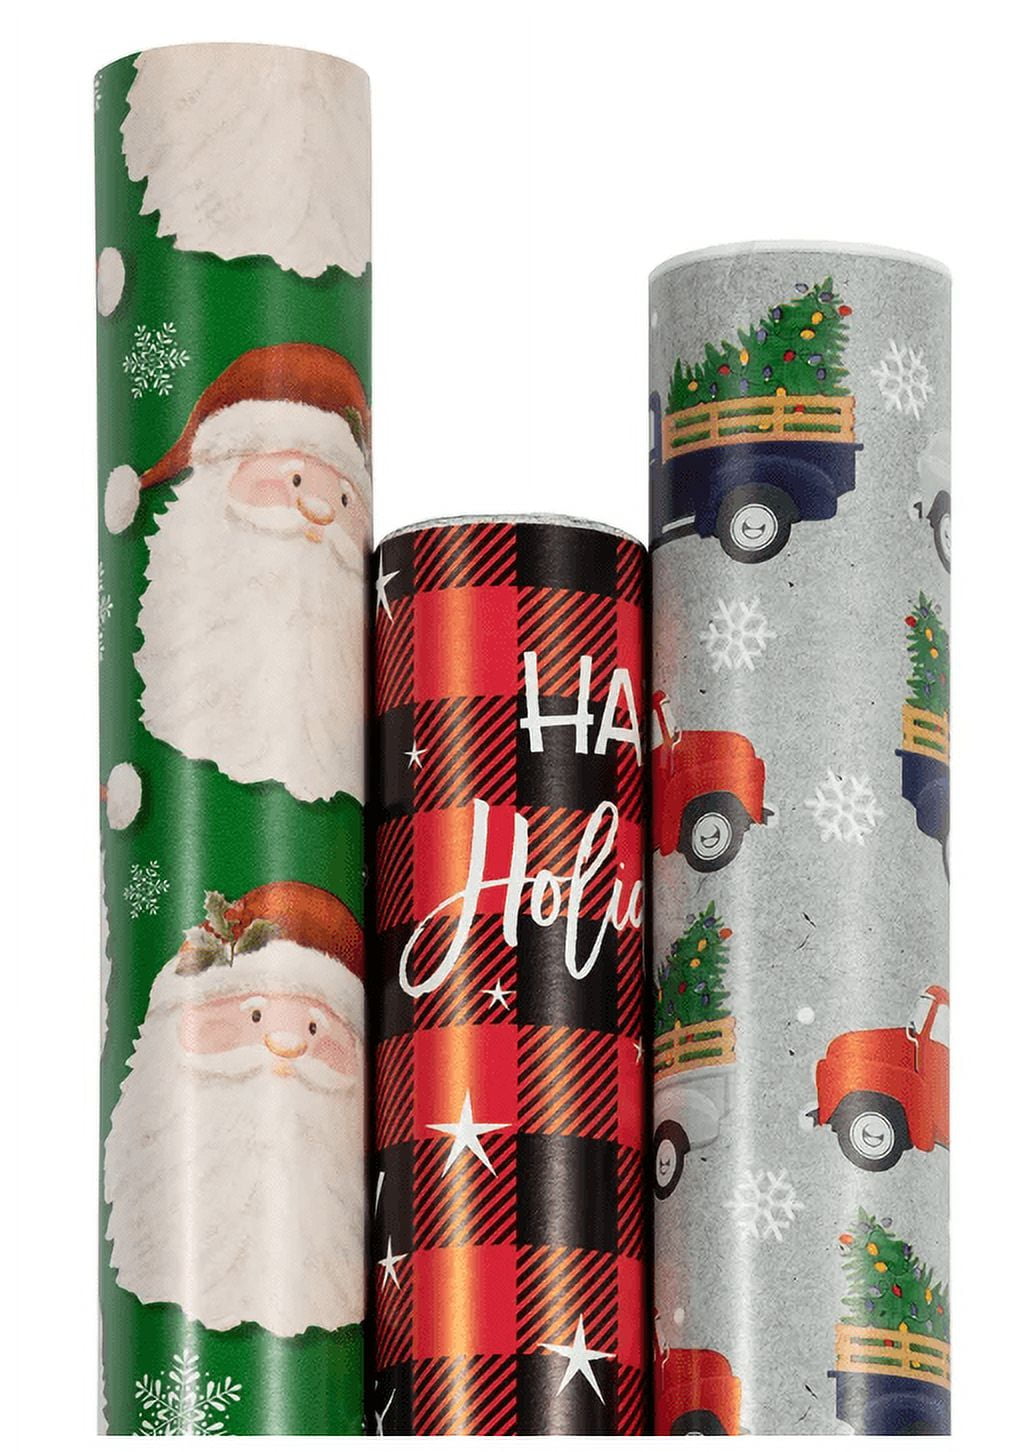 Christmas Wrapping Paper, 3-Roll Pack, 102 Total Sq. Ft.